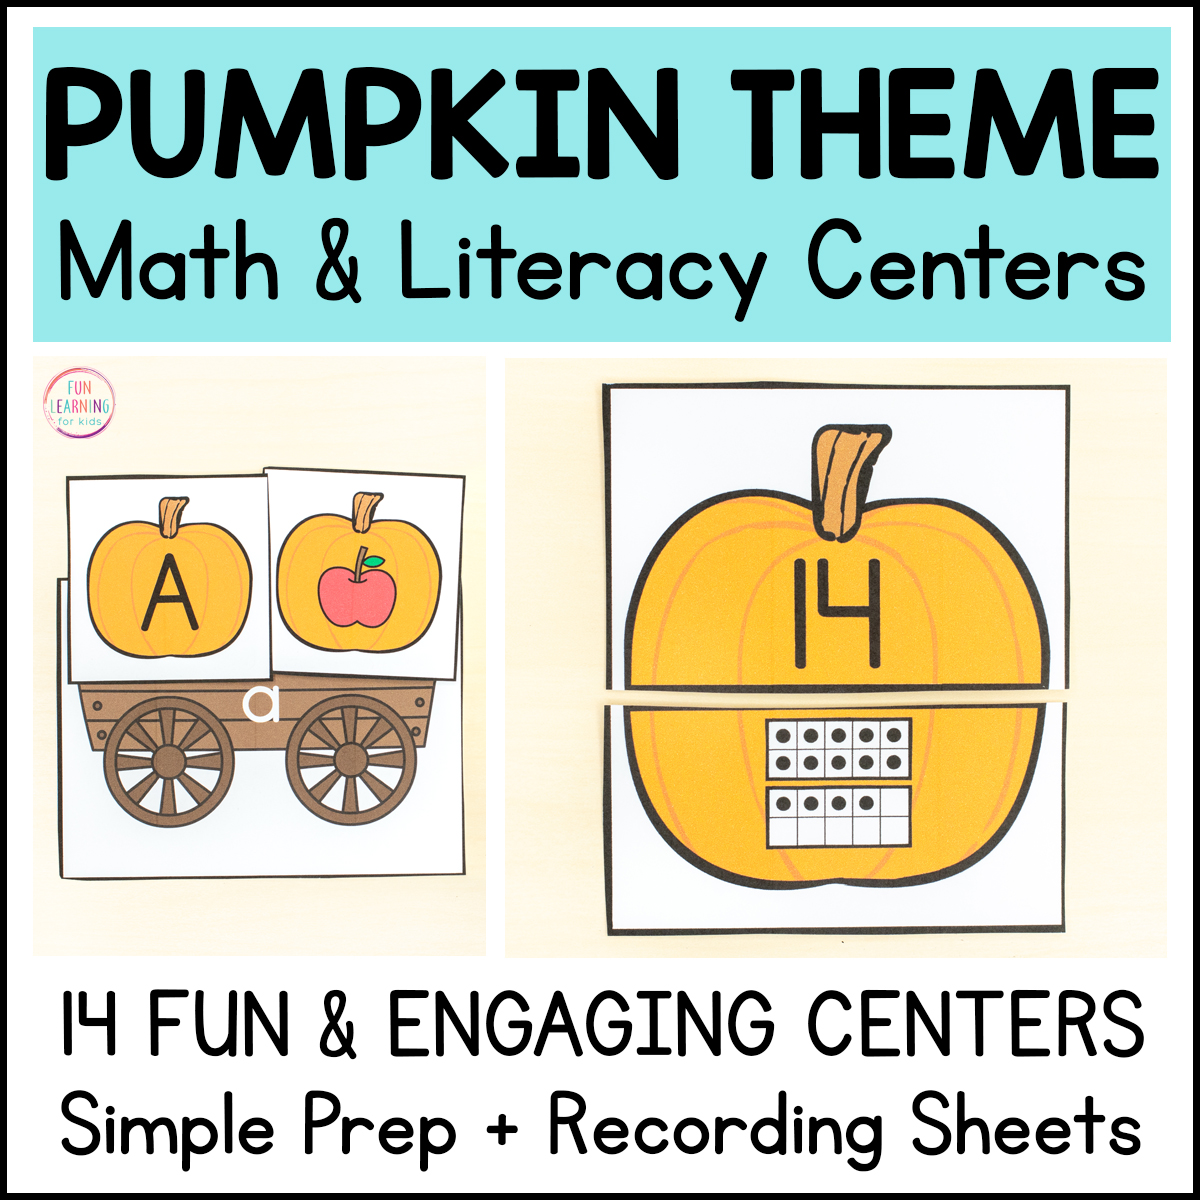 Pumpkin-Theme-Math-and-Literacy-Centers-Cover-1